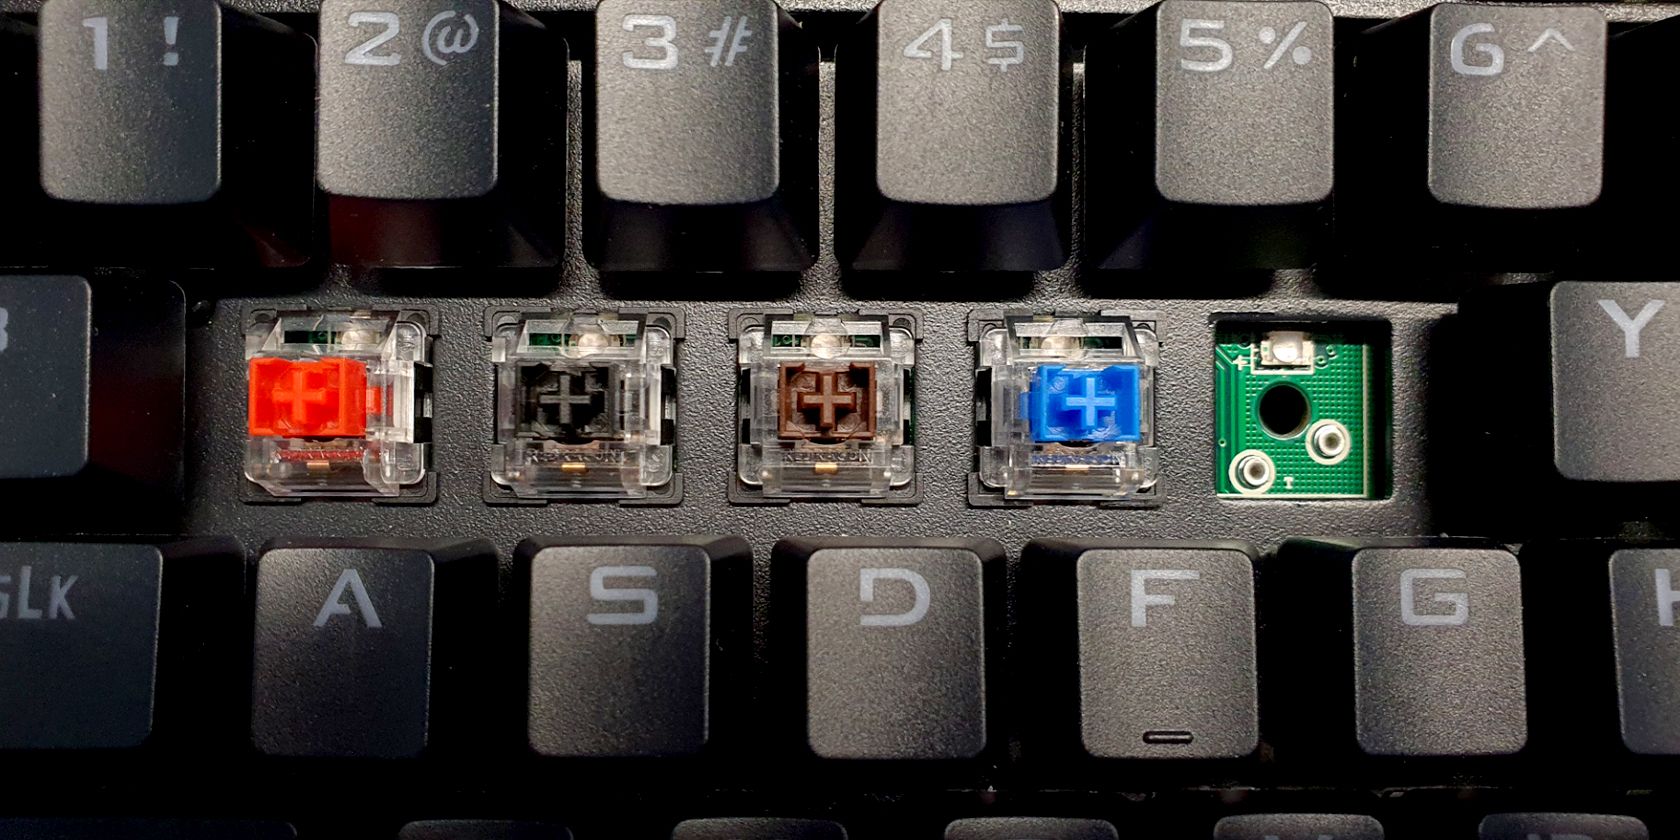 Outemu switch samples mounted on the keyboard